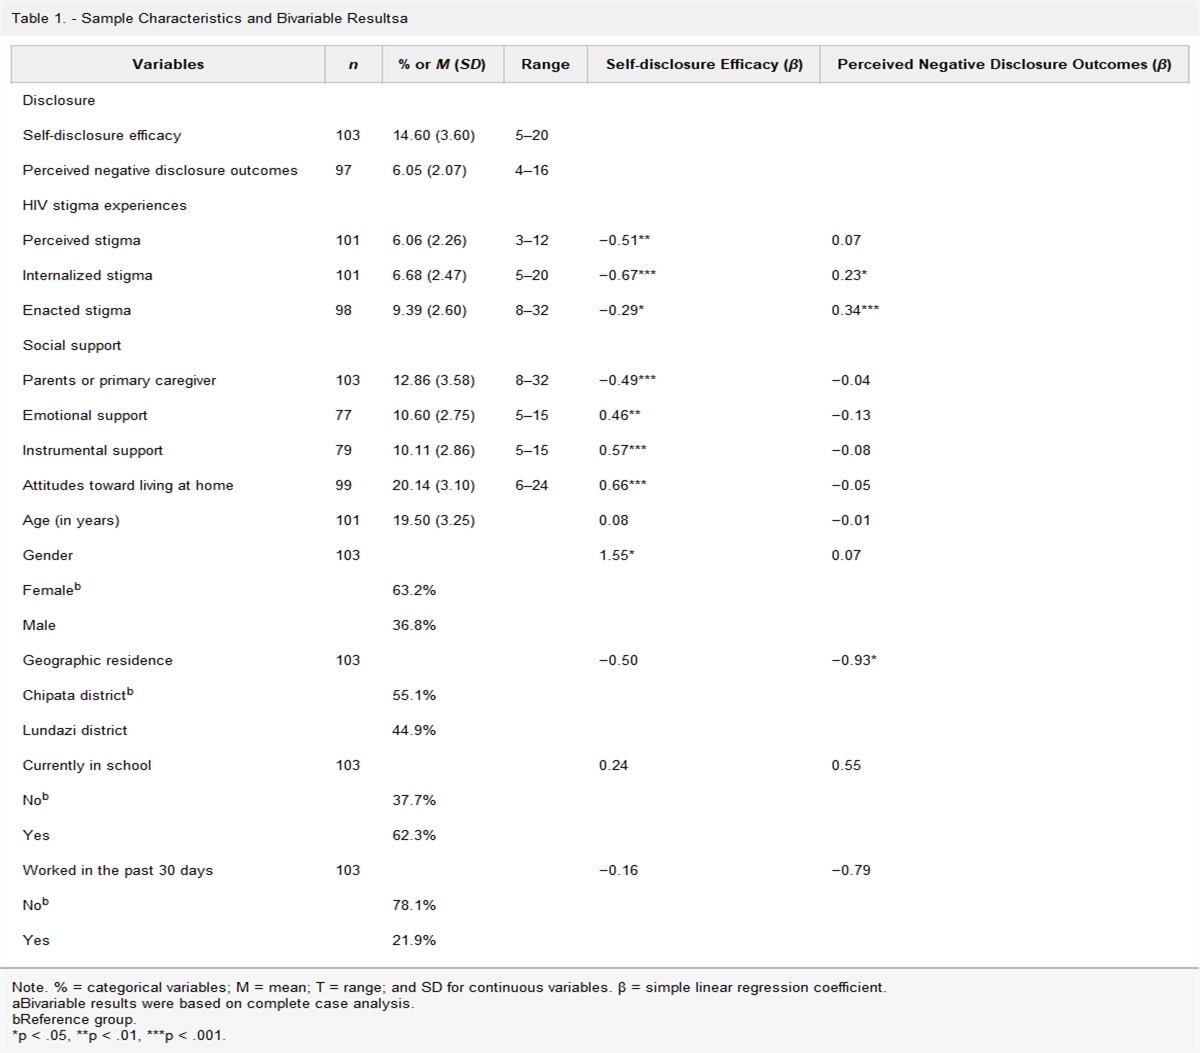 The Association of Emotional Support, HIV Stigma, and Home Environment With Disclosure Efficacy and Perceived Disclosure Outcomes in Young People Living With HIV in Zambia: A Cross-Sectional Study